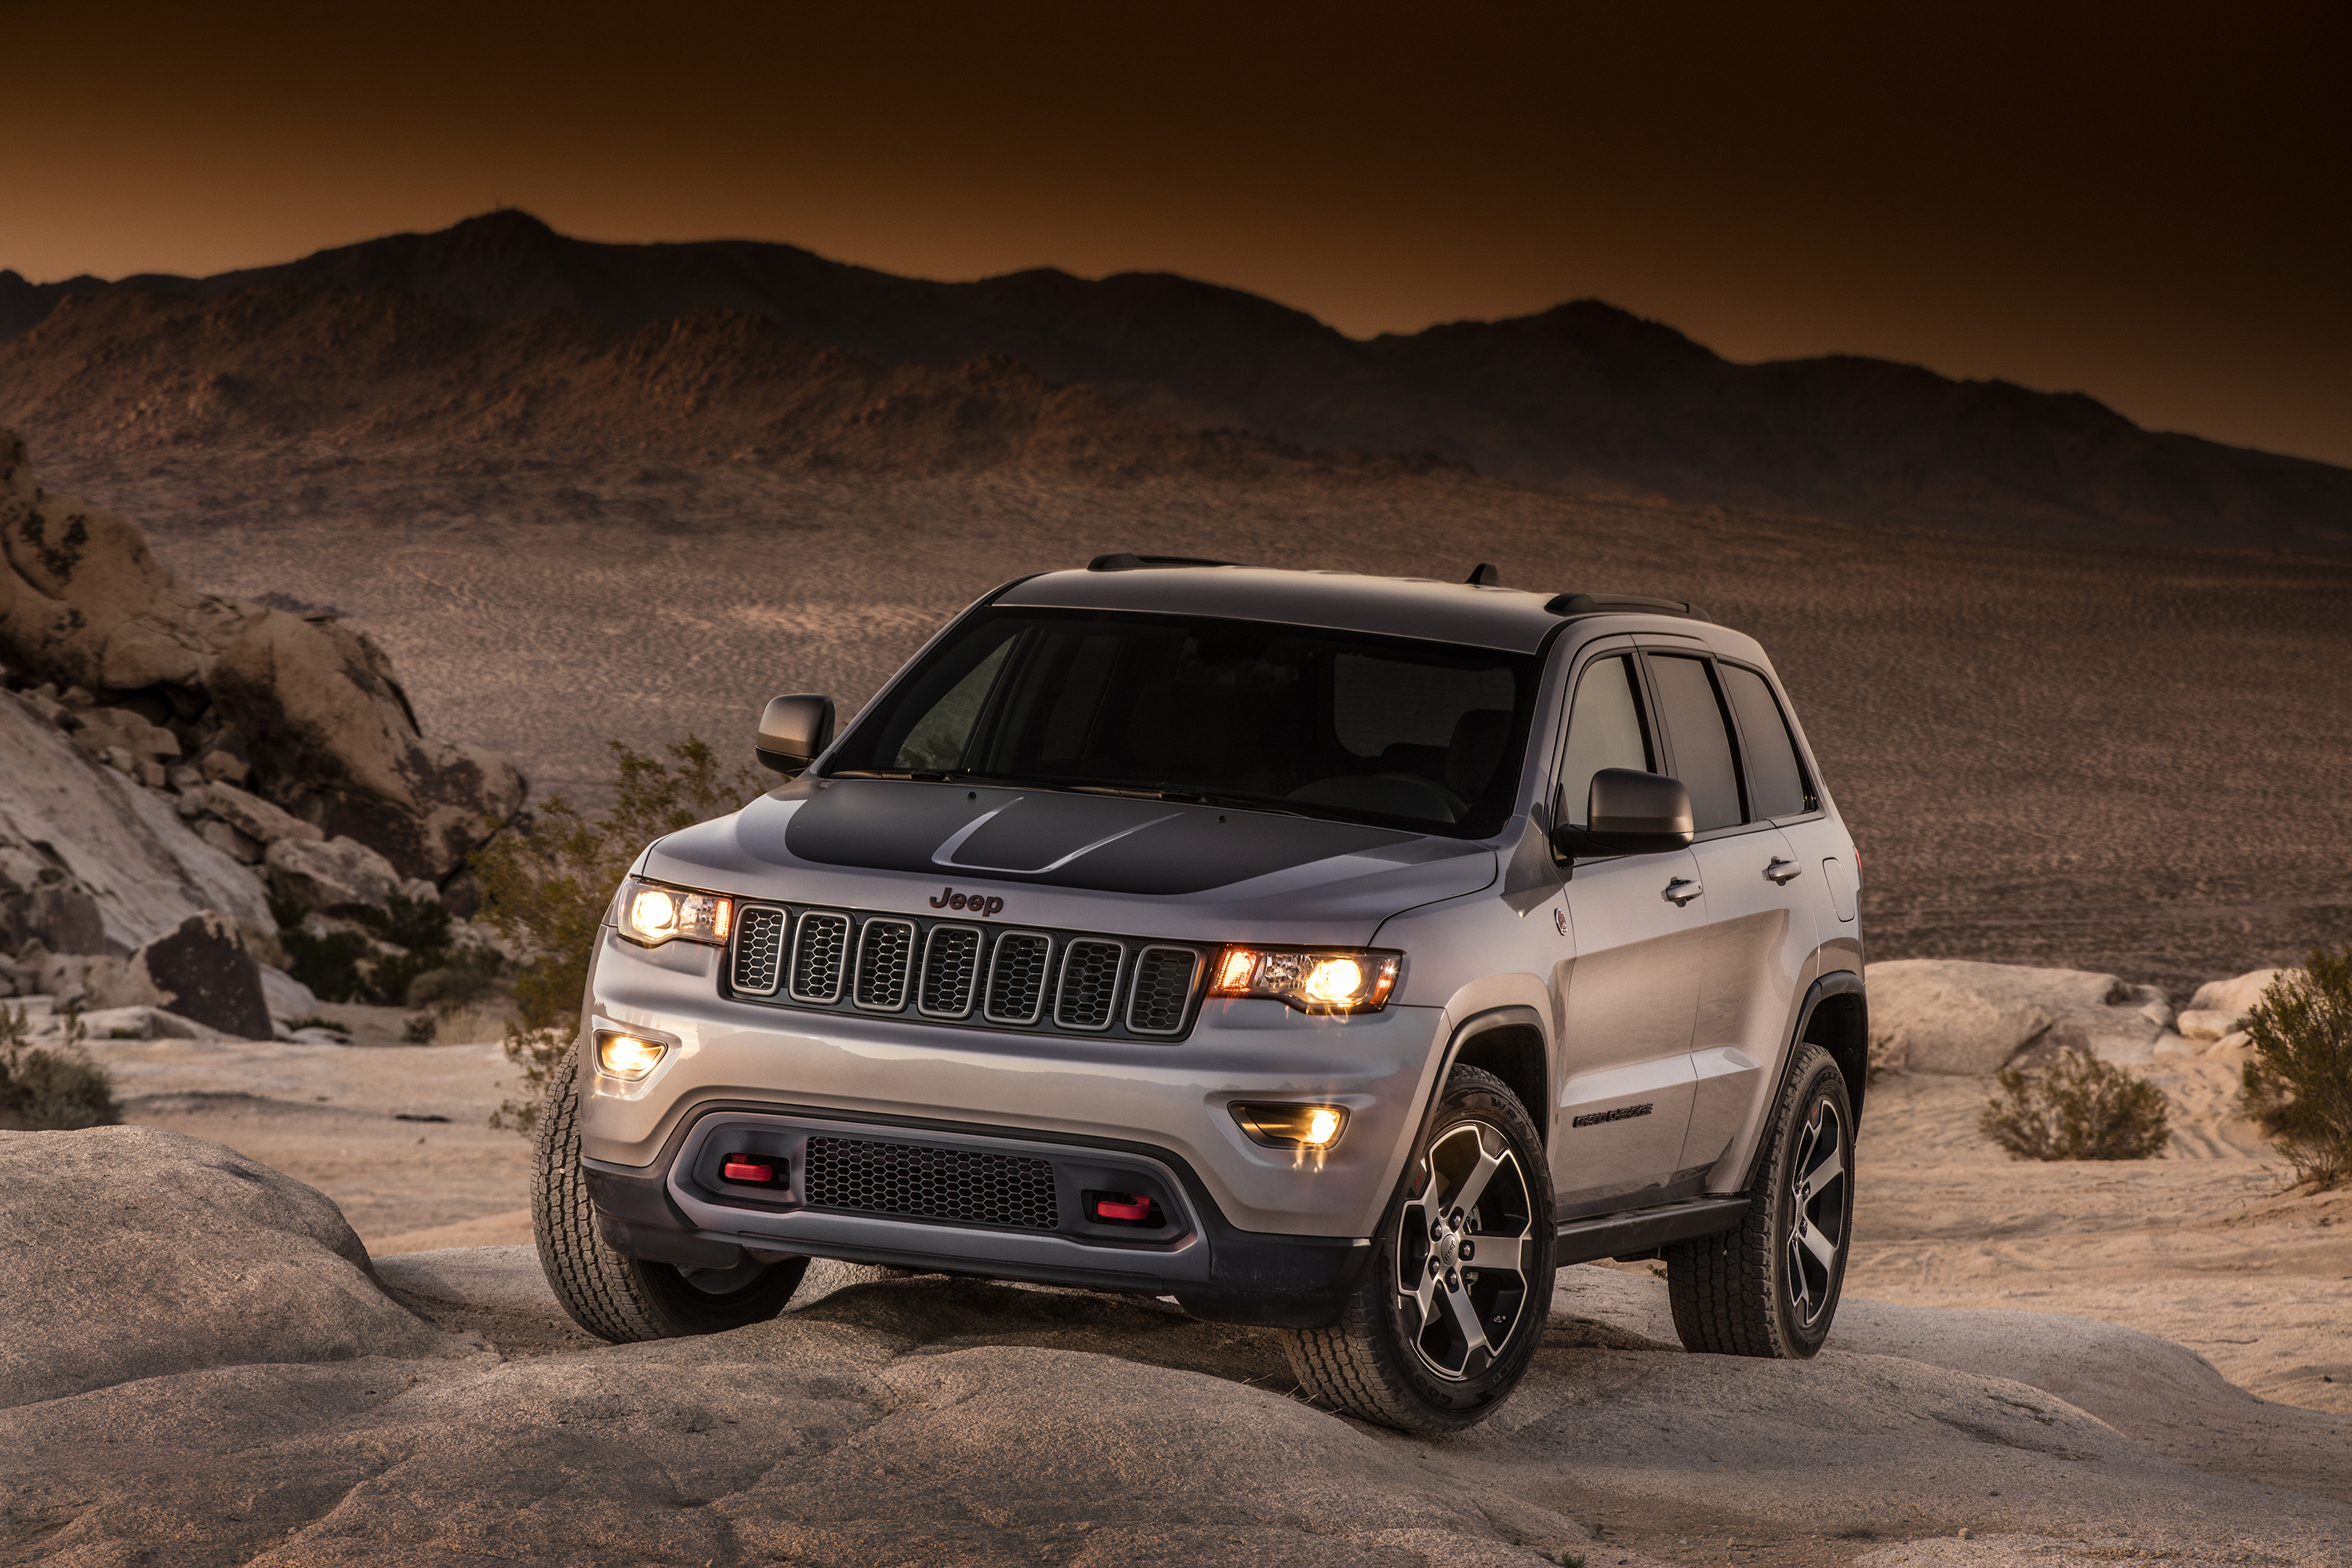 8k Jeep Grand Cherokee Images